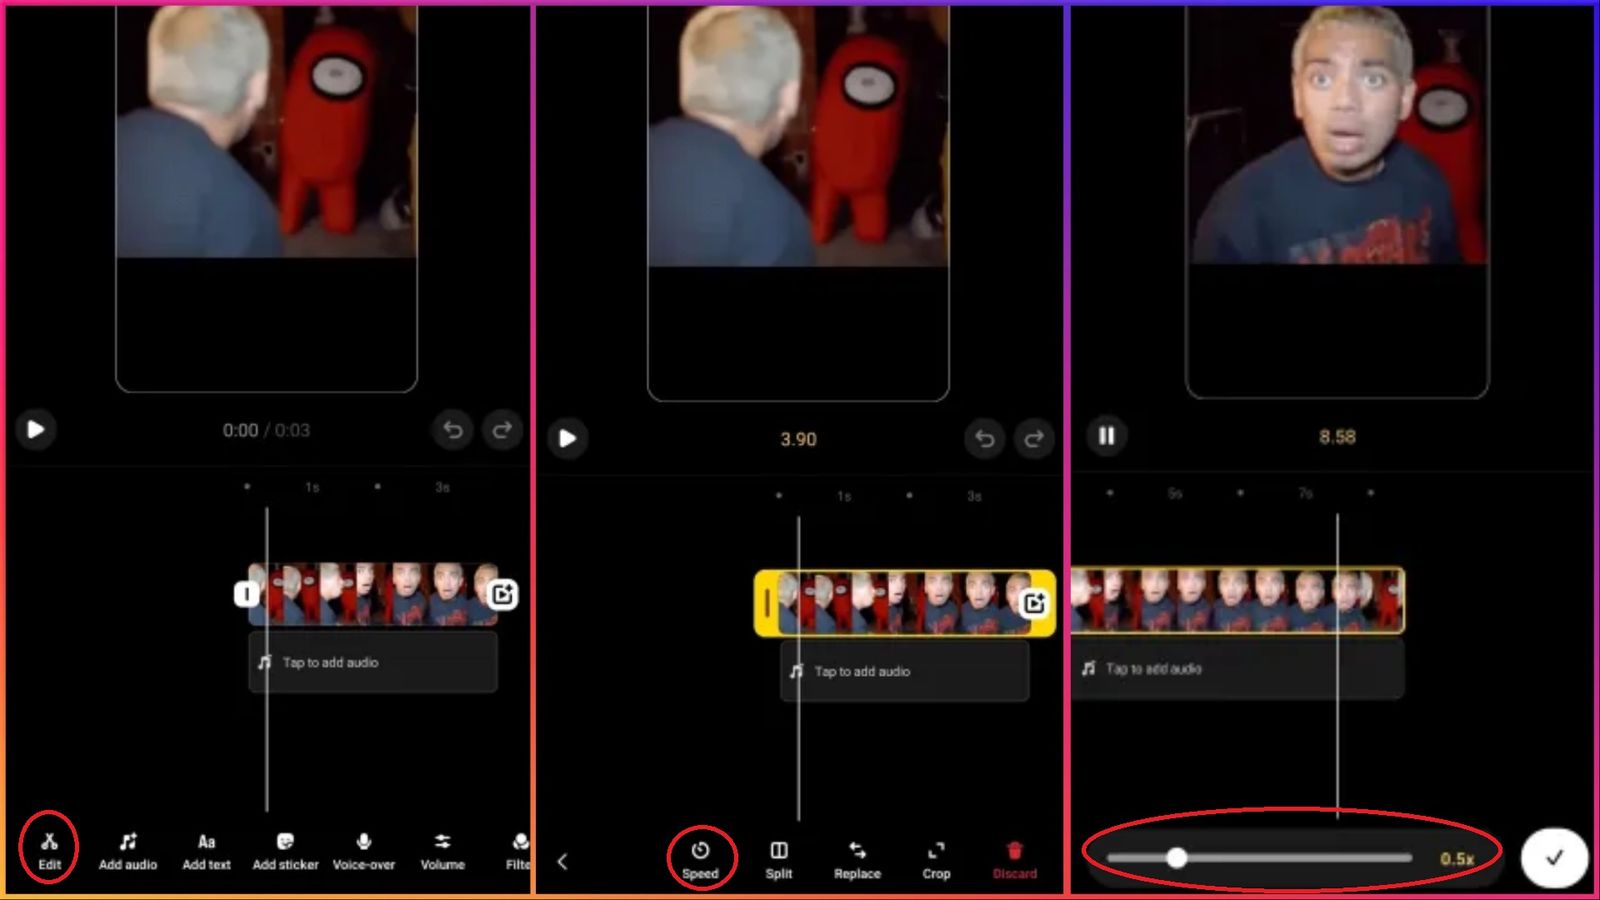 Screenshots of Instagram showing the process to speed up a video